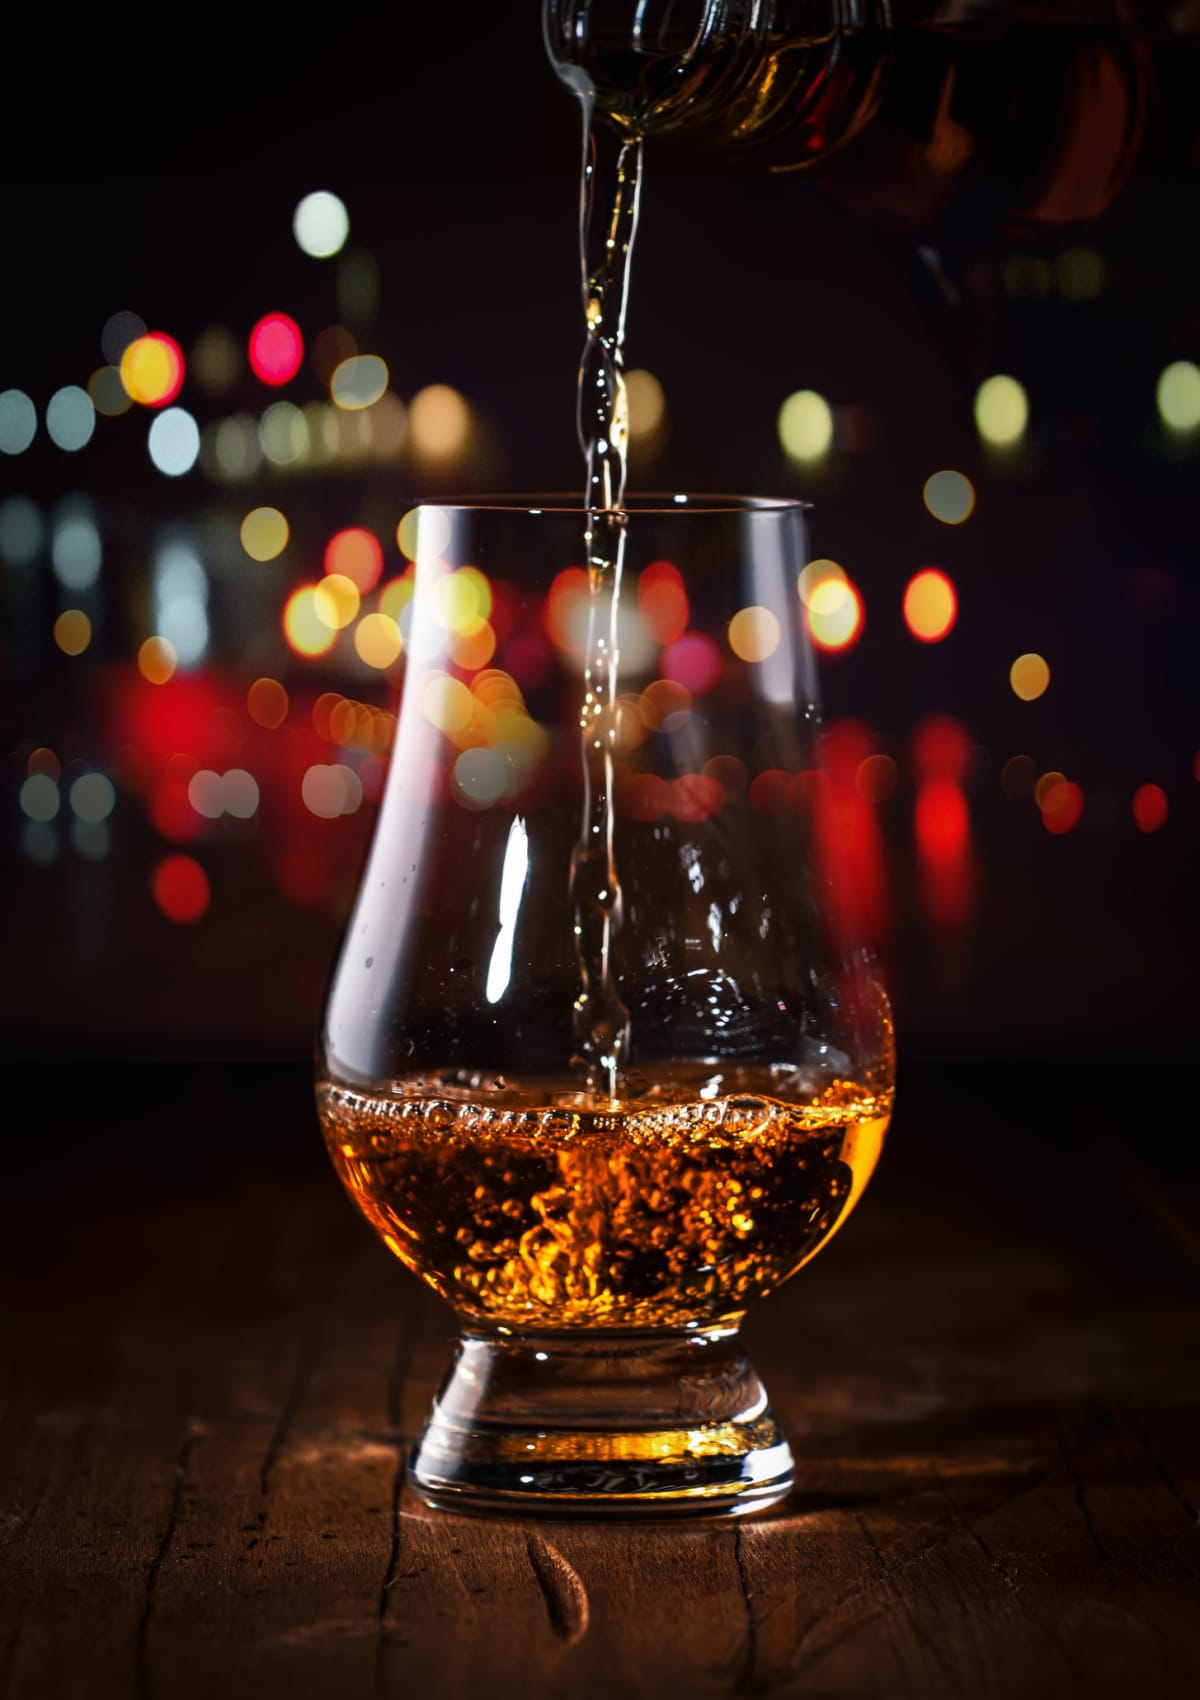 Whiskey pouring into Glencairn glass